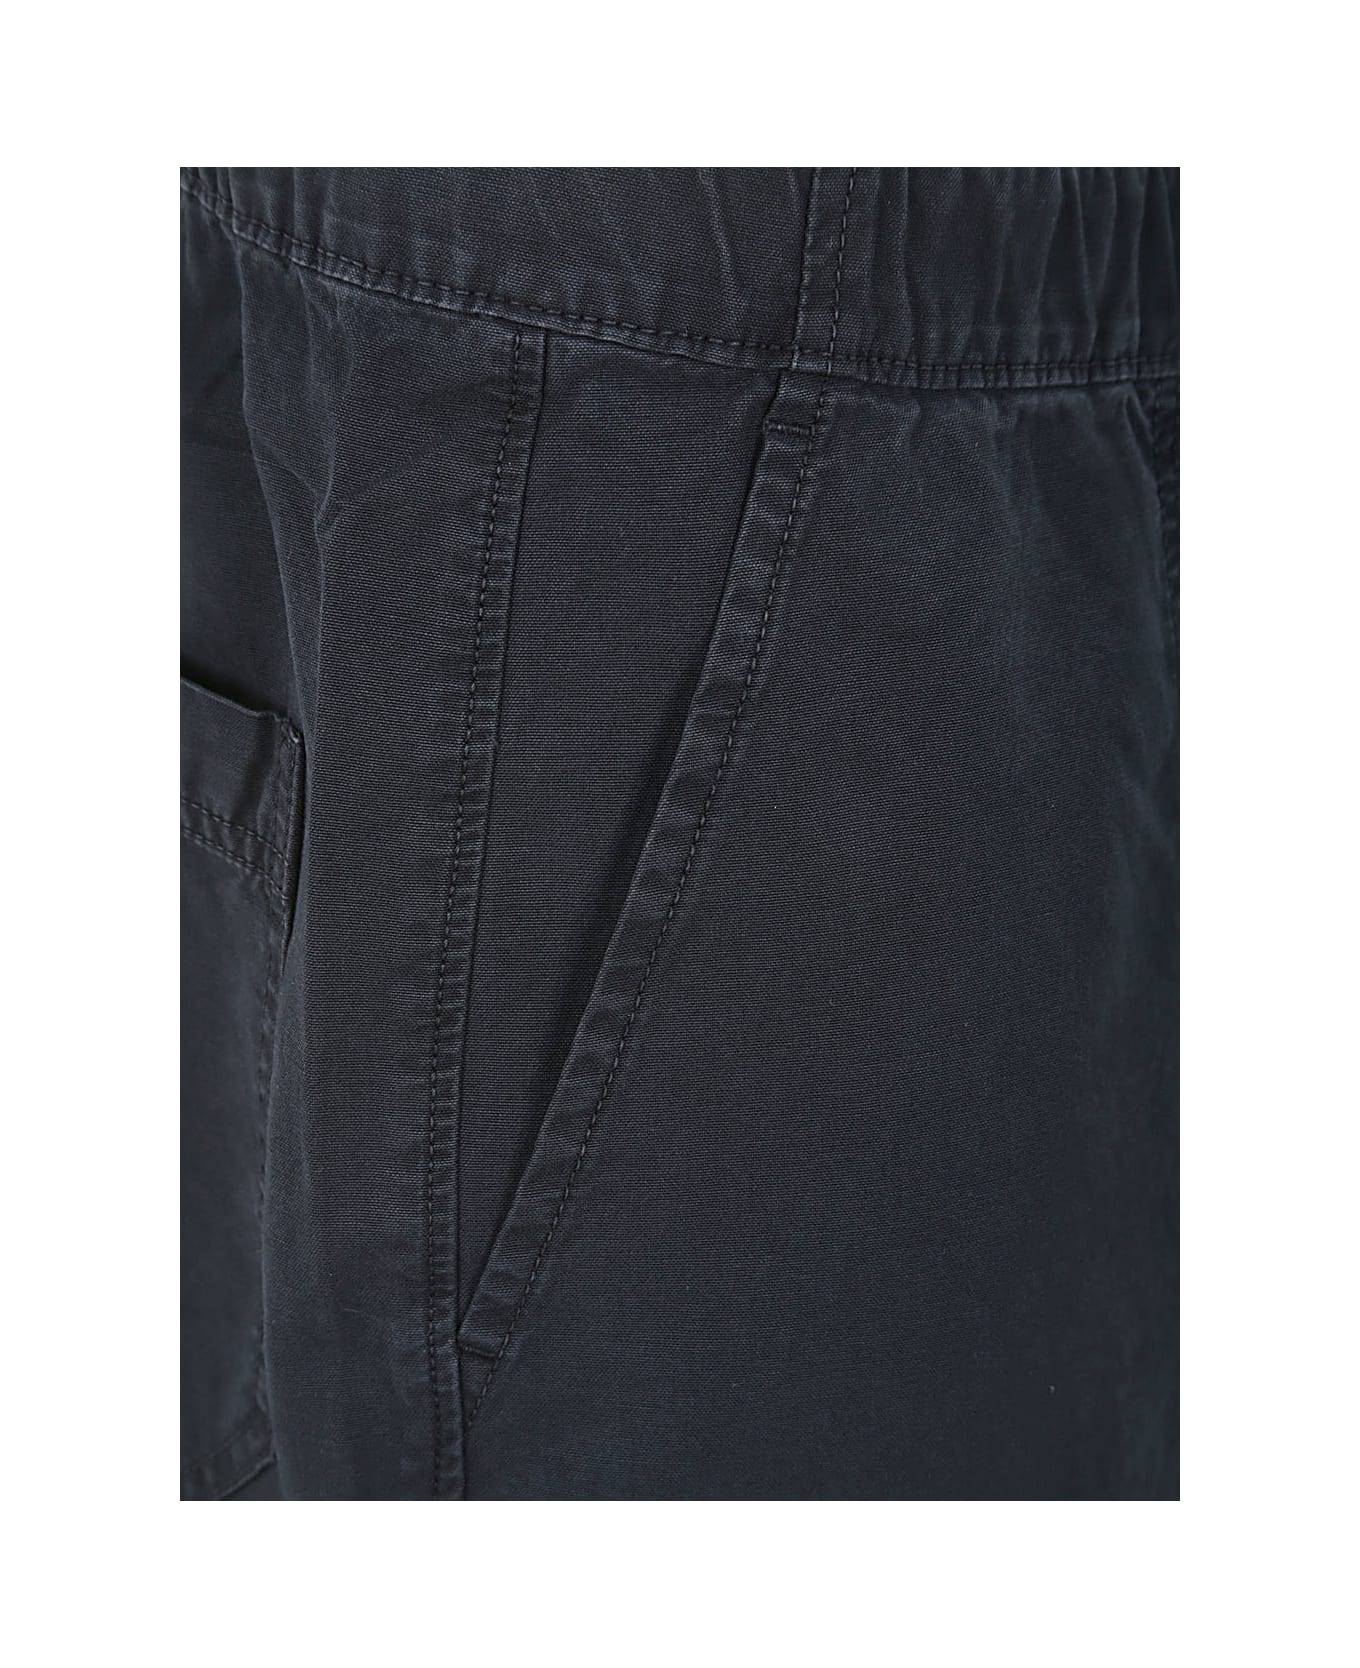 Barbour Grindle Trousers - Navy